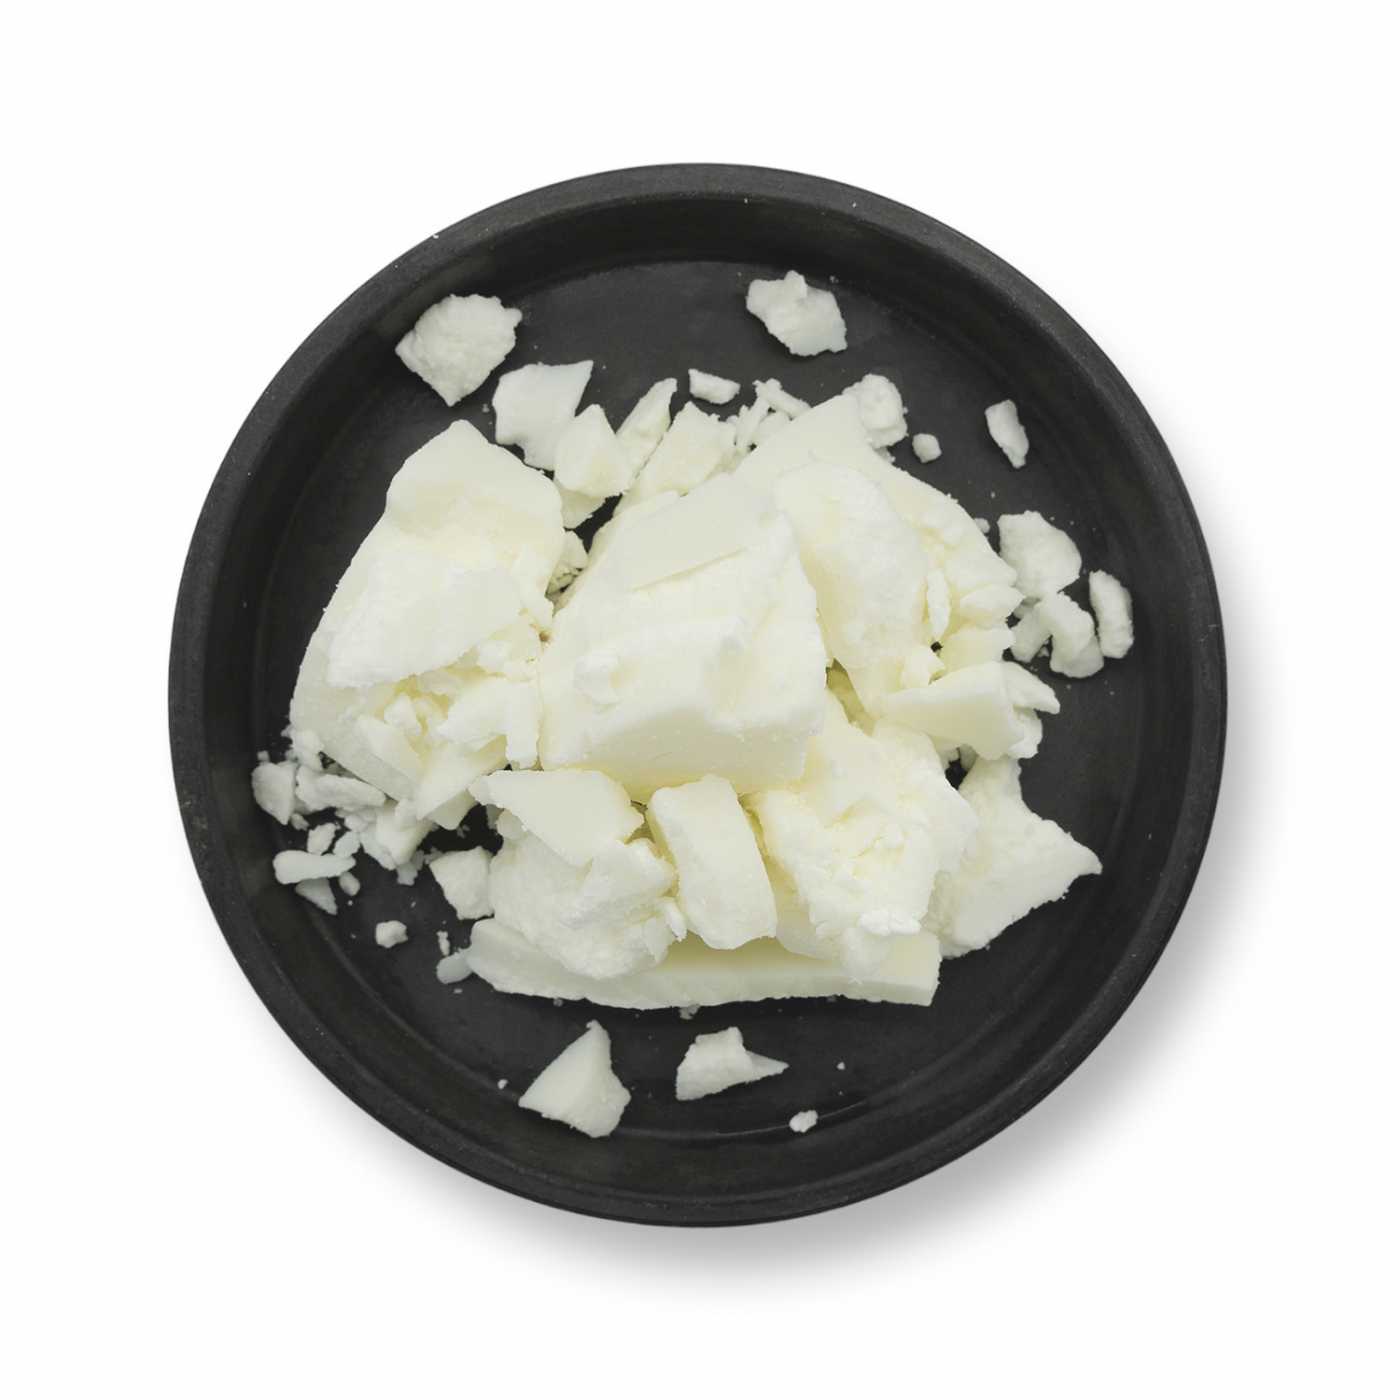 Benefits of Rapeseed and Coconut Wax